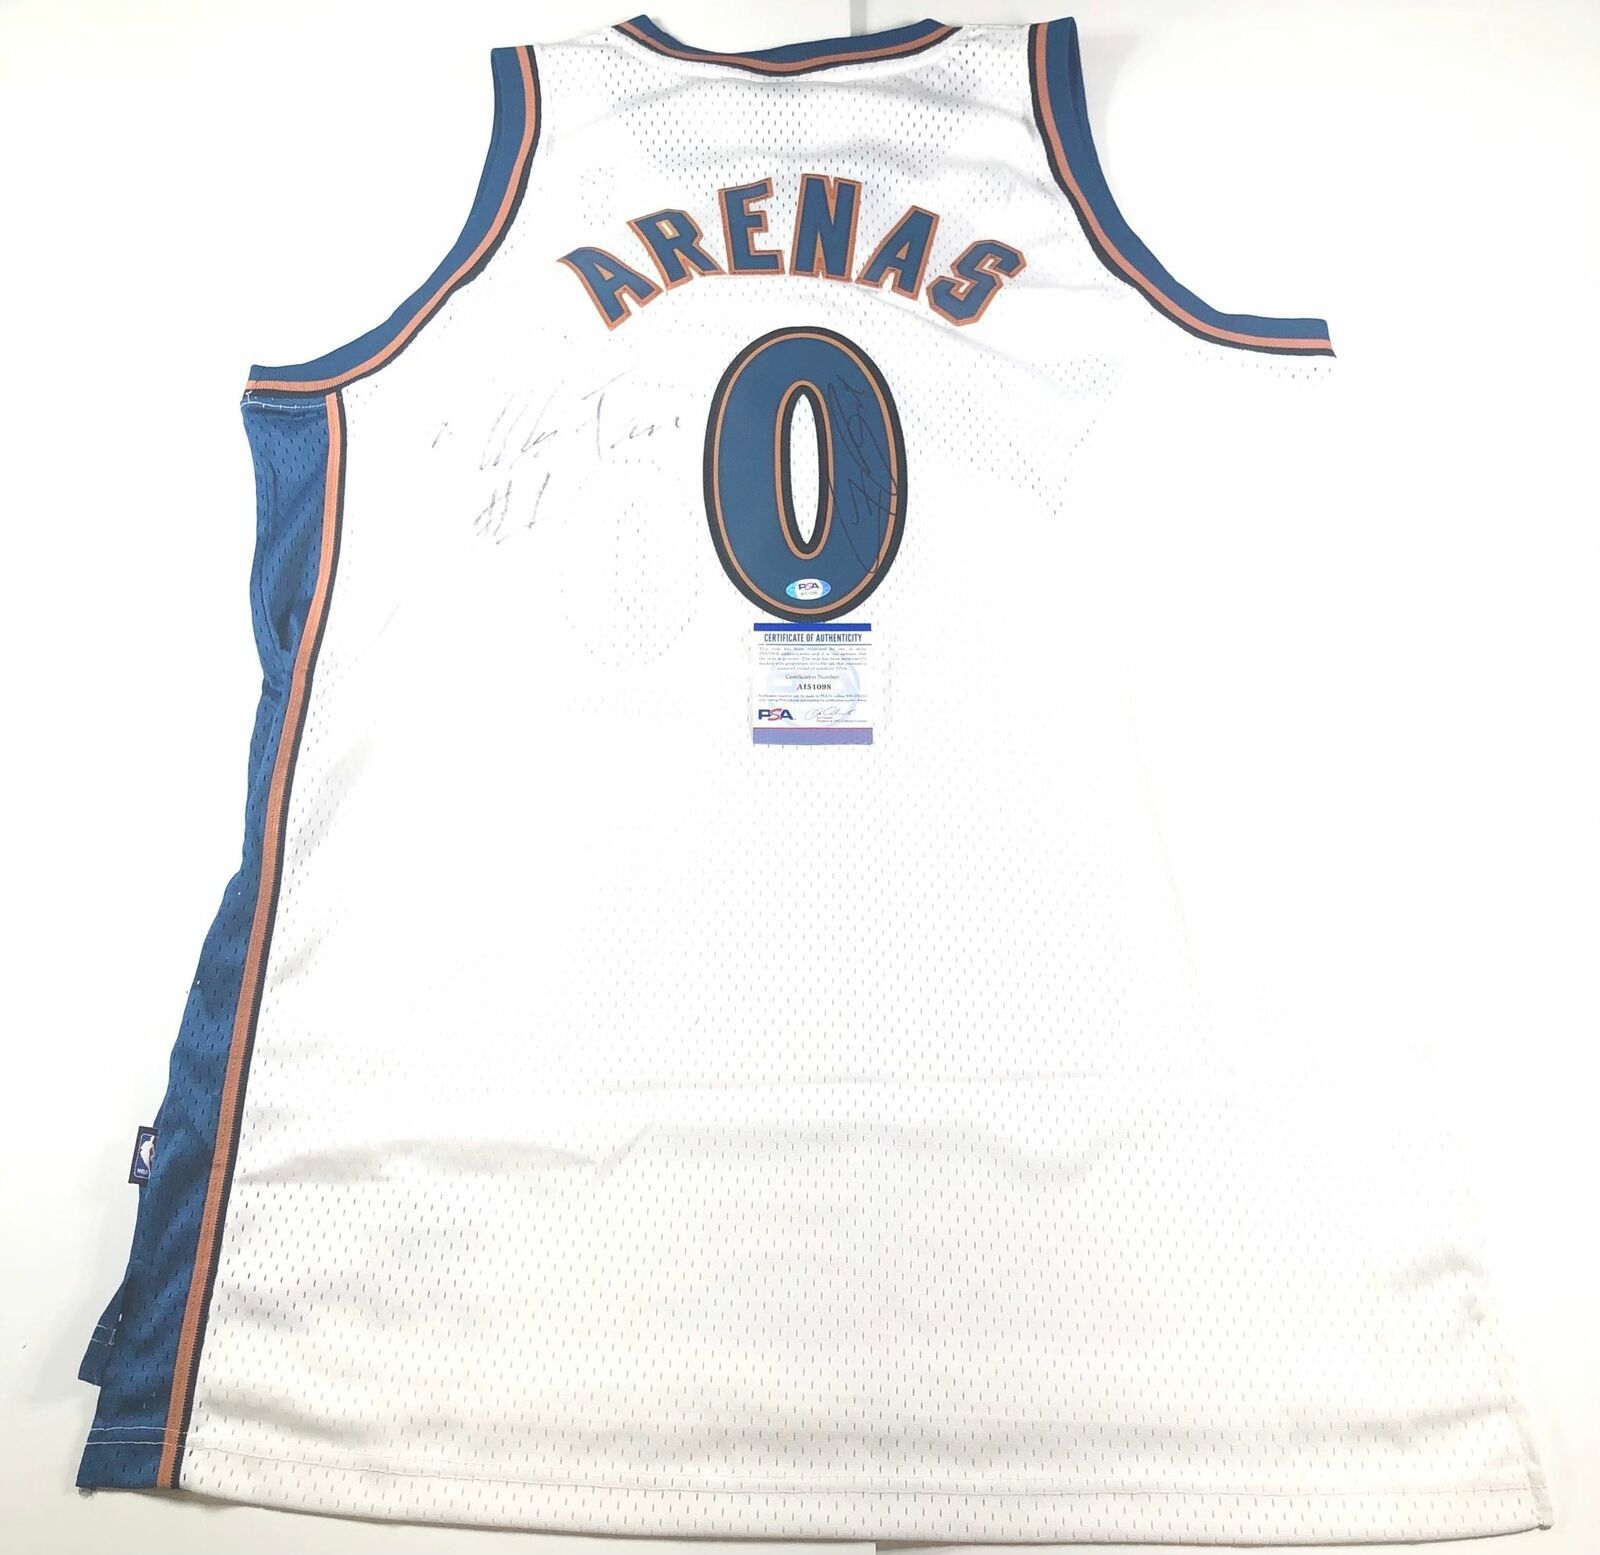 Primary image for Gilbert Arenas Signed Jersey PSA/DNA Washington Wizards Autographed